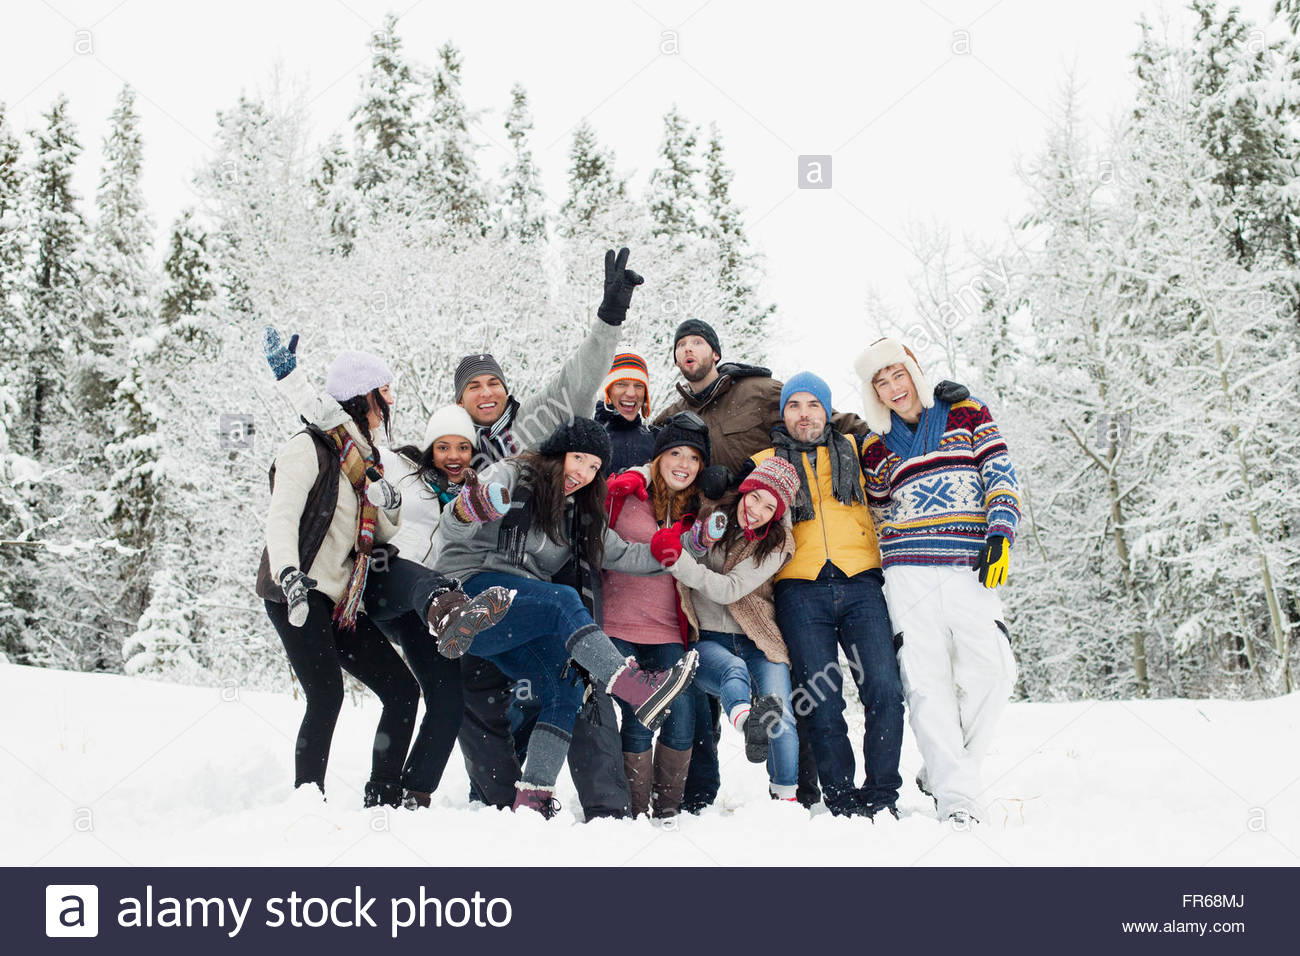 group photo of adults in the countryside Stock Photo